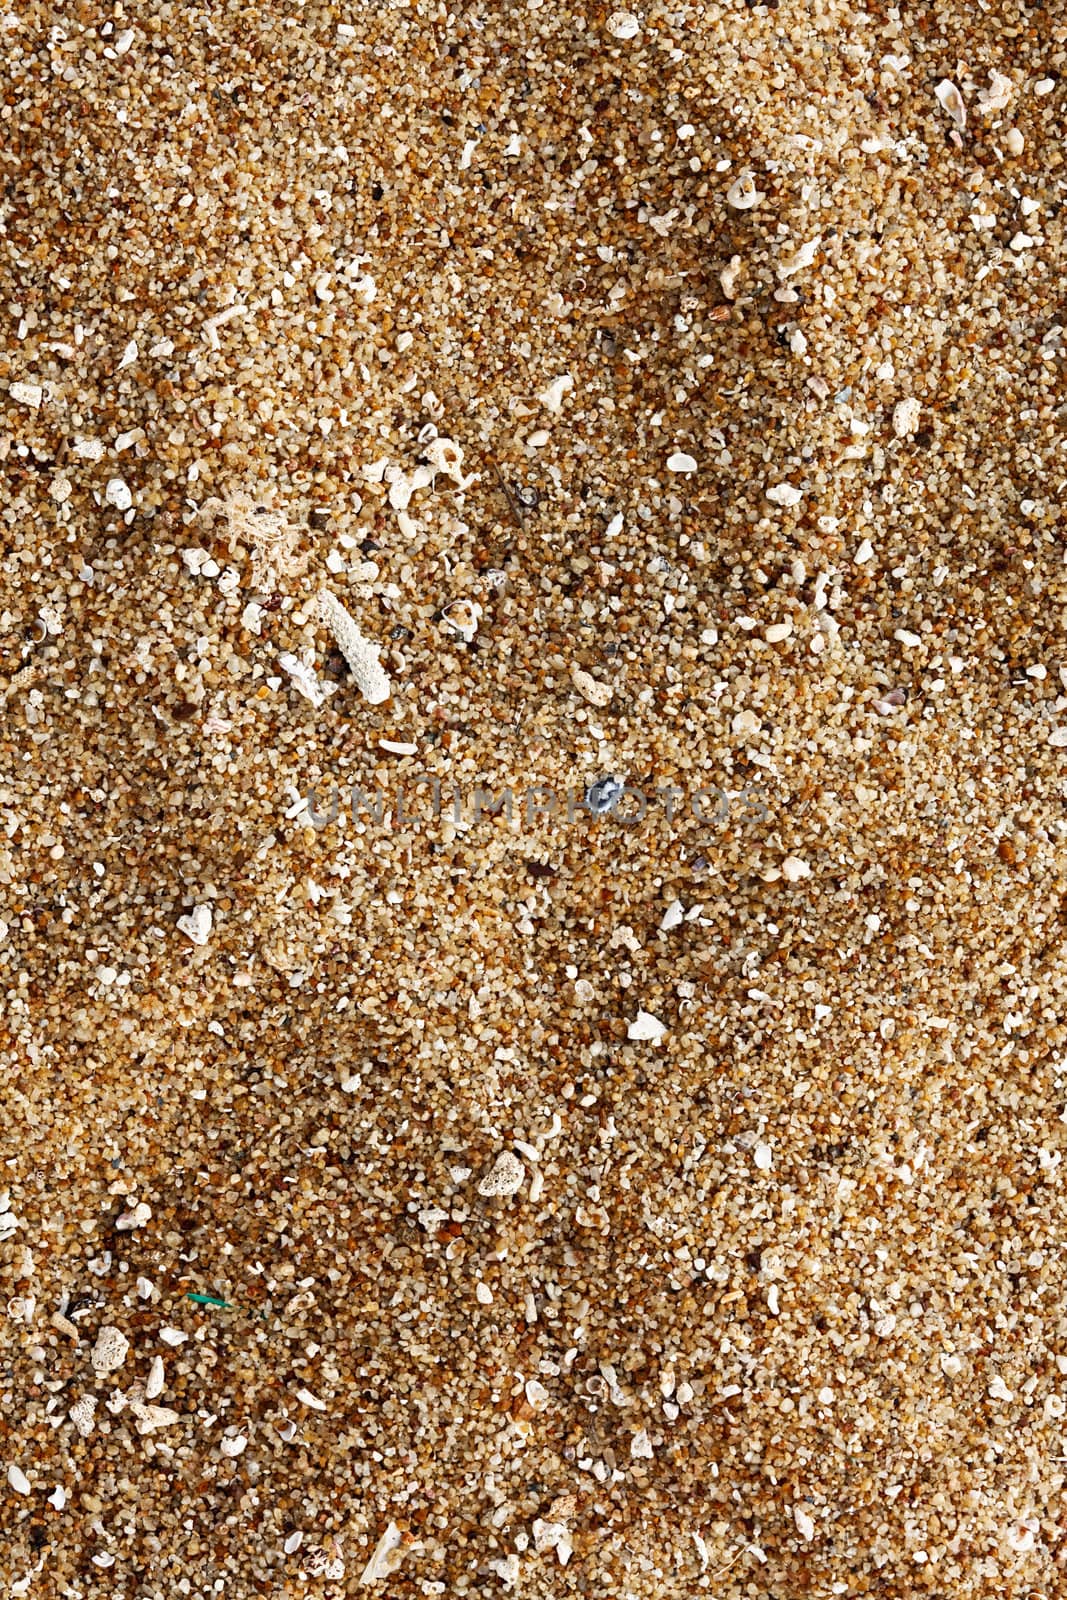 Beach sand of grinded sea shells by dimol